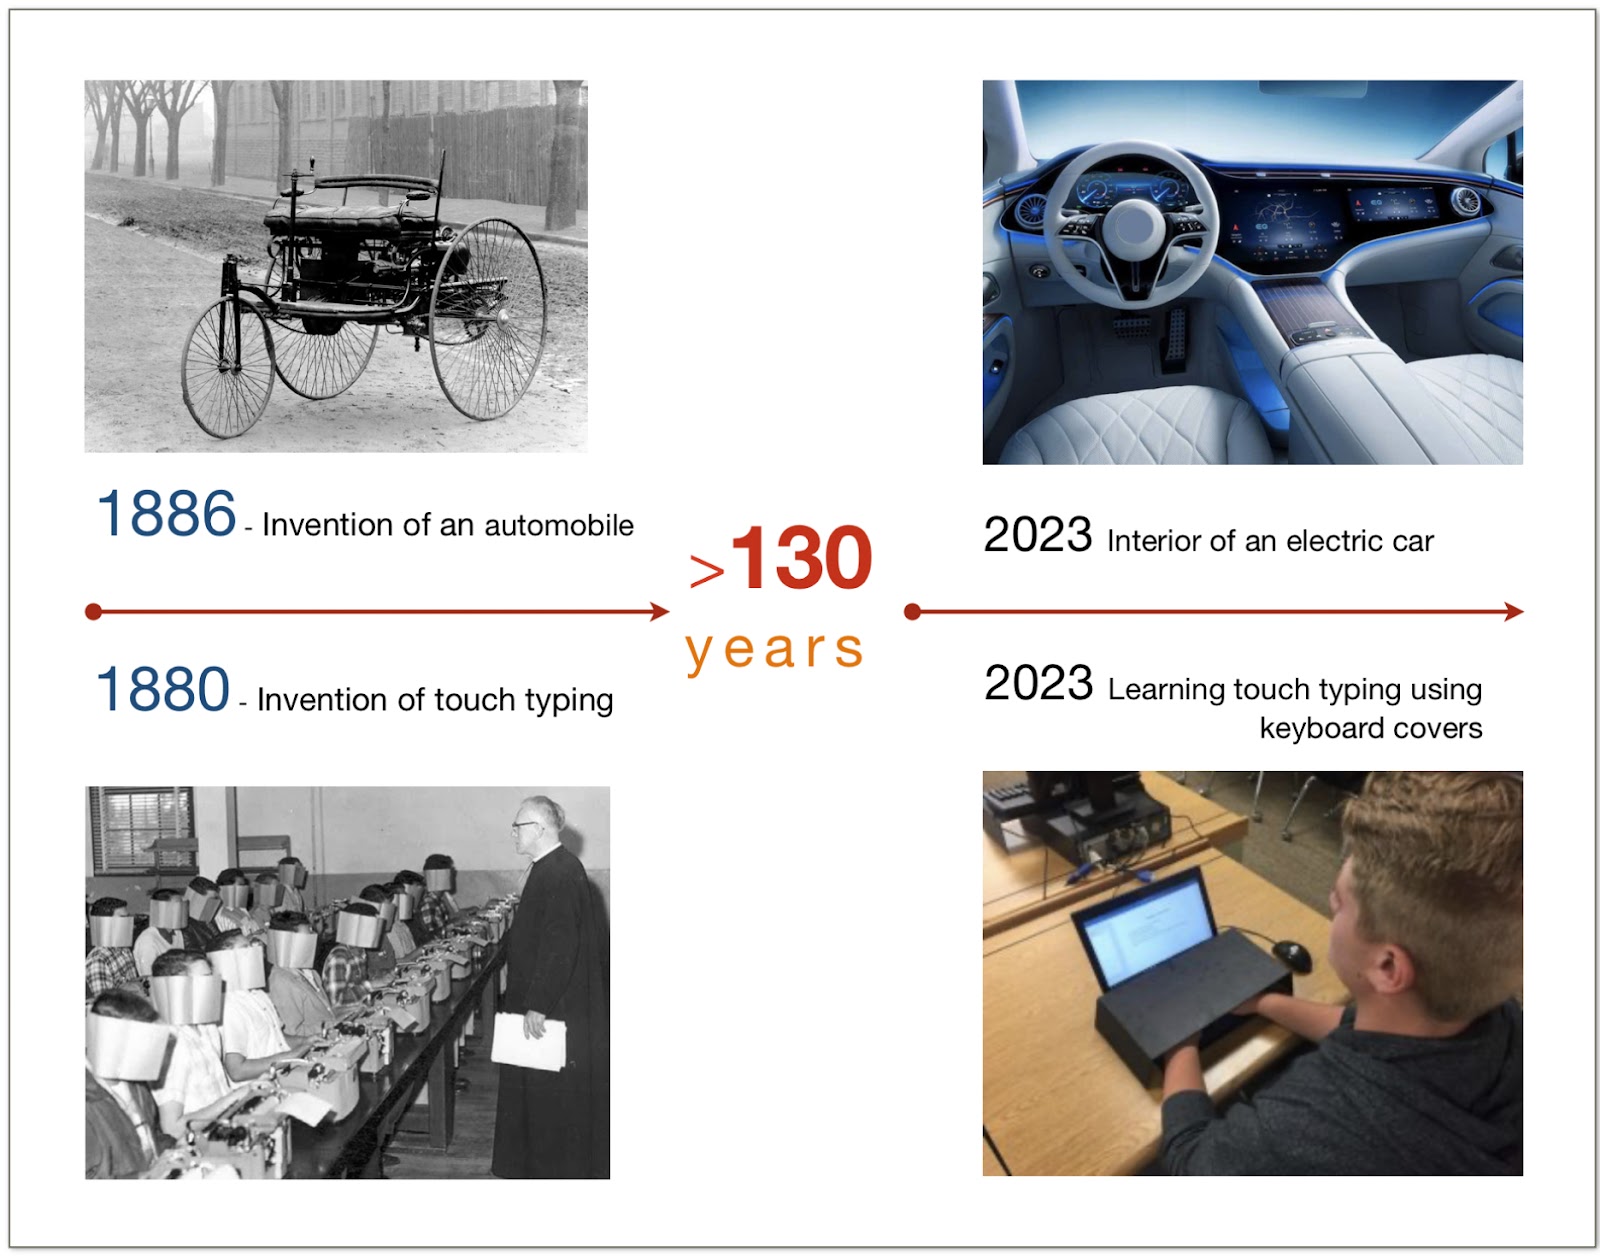 Progress in automobile industry vs. methods of learning typing